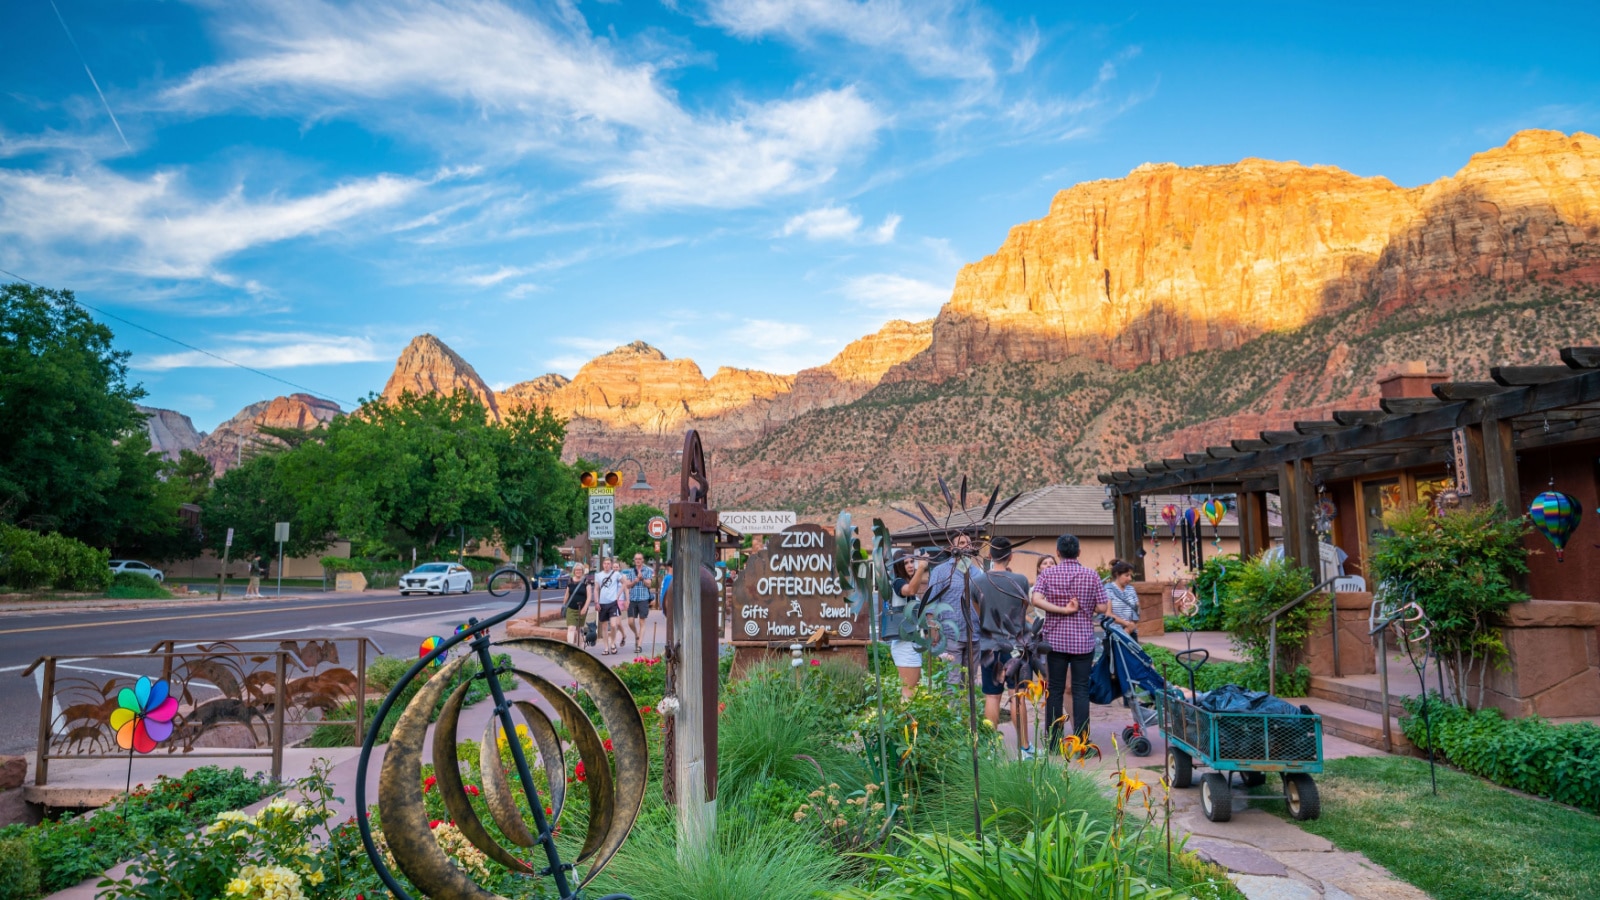 Springdale, Utah, USA - JULY 8, 2016: A small local town near the Zion National Park entrance